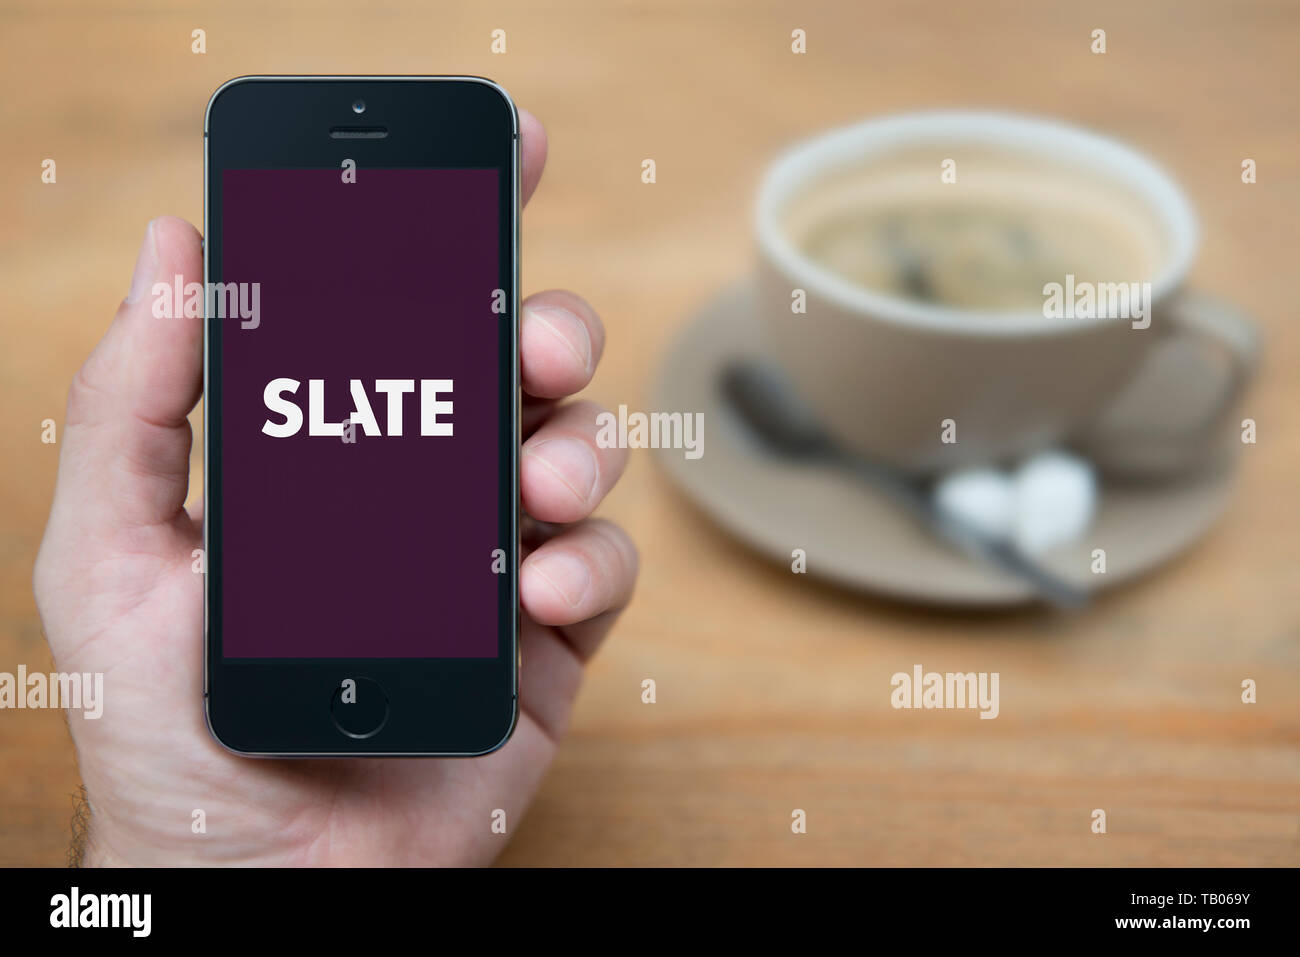 A man looks at his iPhone which displays the Slate Magazine logo (Editorial use only). Stock Photo